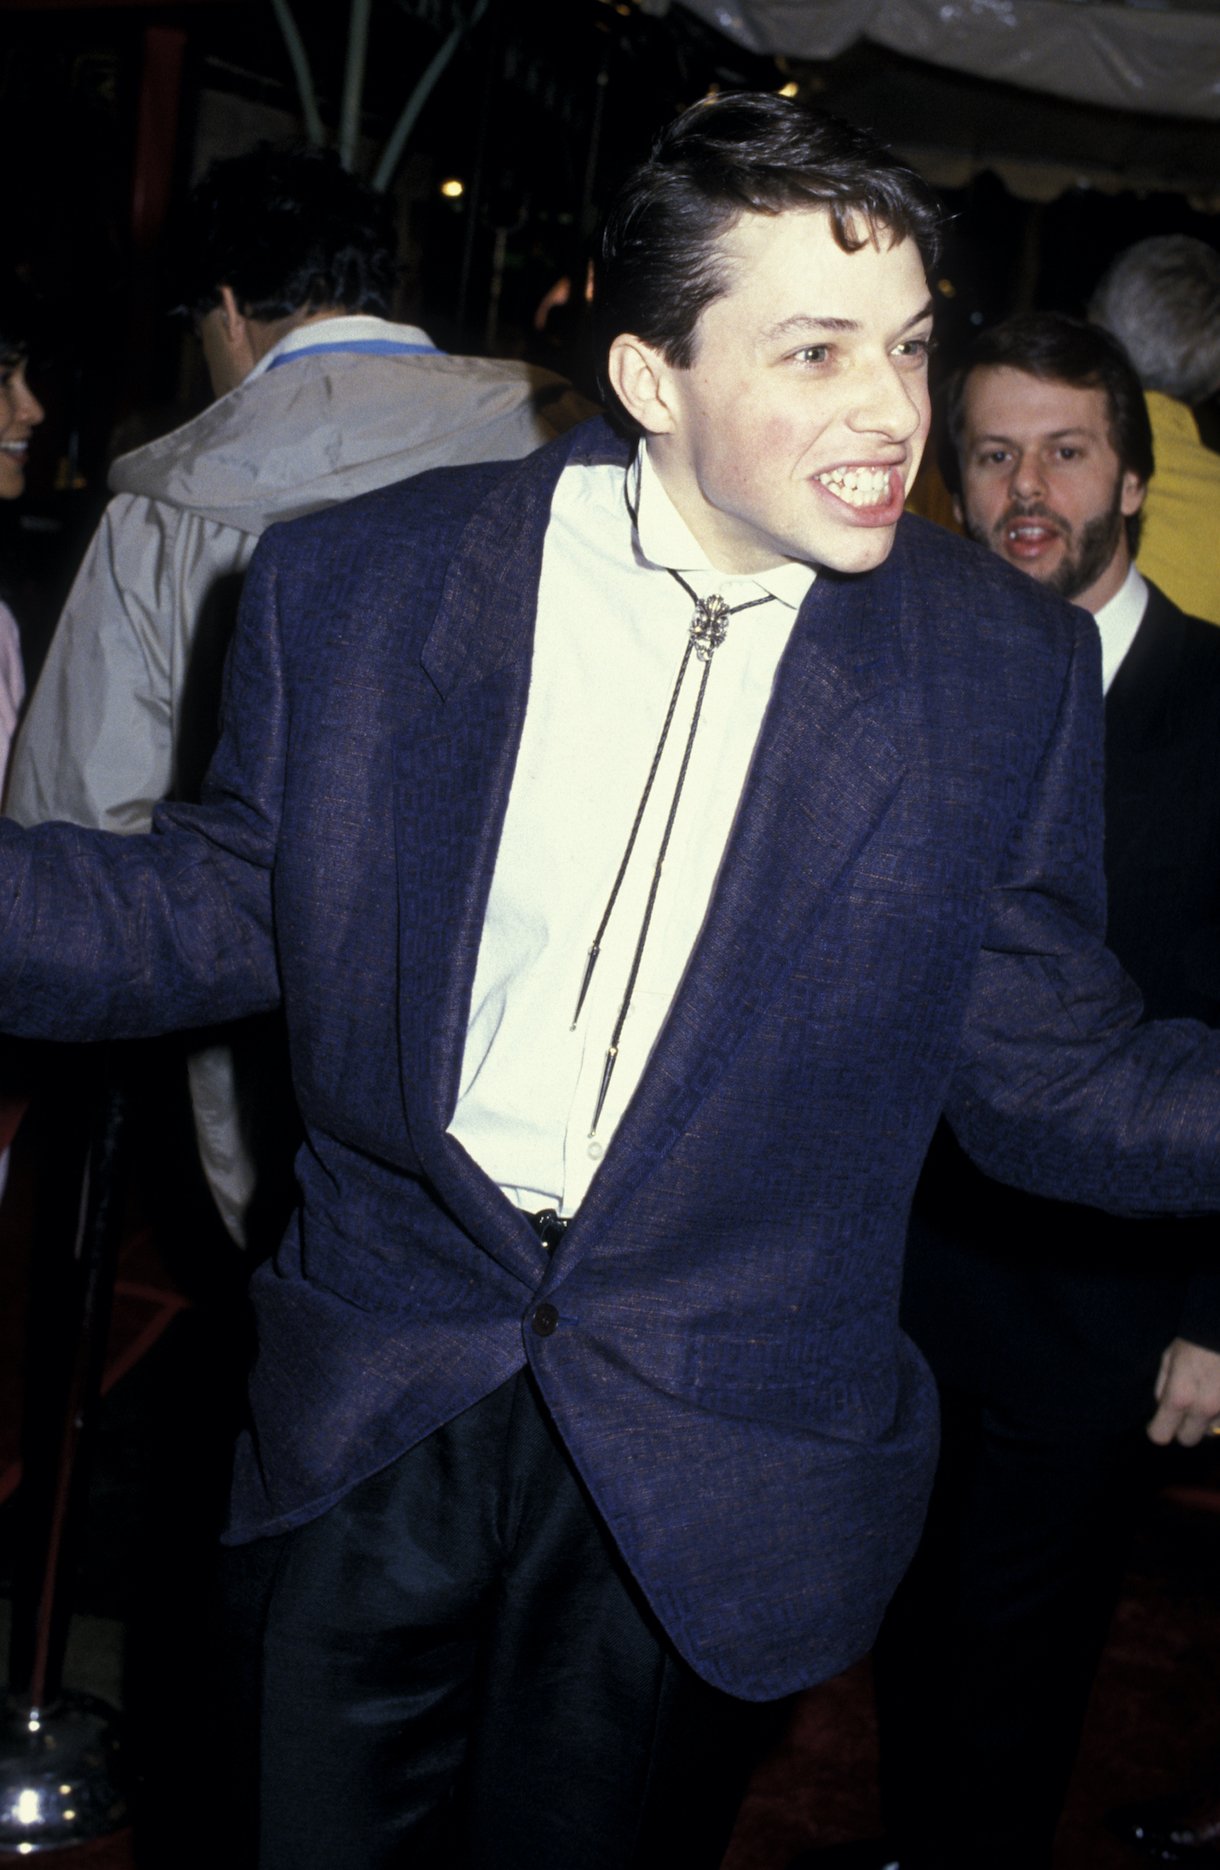 Jon Cryer attends the premiere of "Pretty In Pink" on January 29, 1986 at Mann Chinese Theater